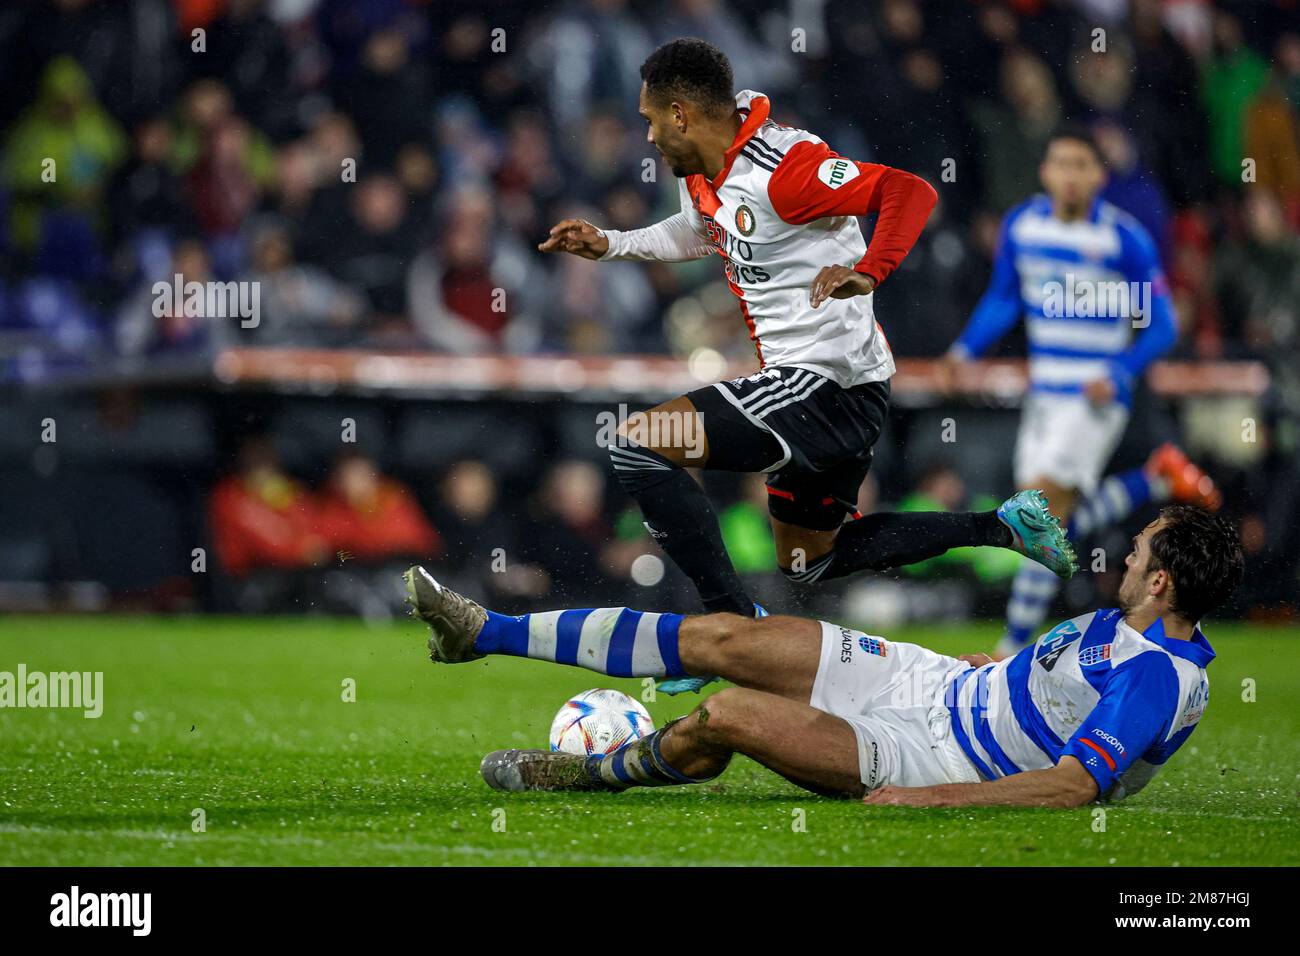 ROTTERDAM, NETHERLANDS - JANUARY 12: Danilo of Feyenoord, Sam Kersten of  PEC Zwolle during the Dutch TOTO KNVB Cup Round 2 match between Feyenoord  and PEC Zwolle at De Kuip on January